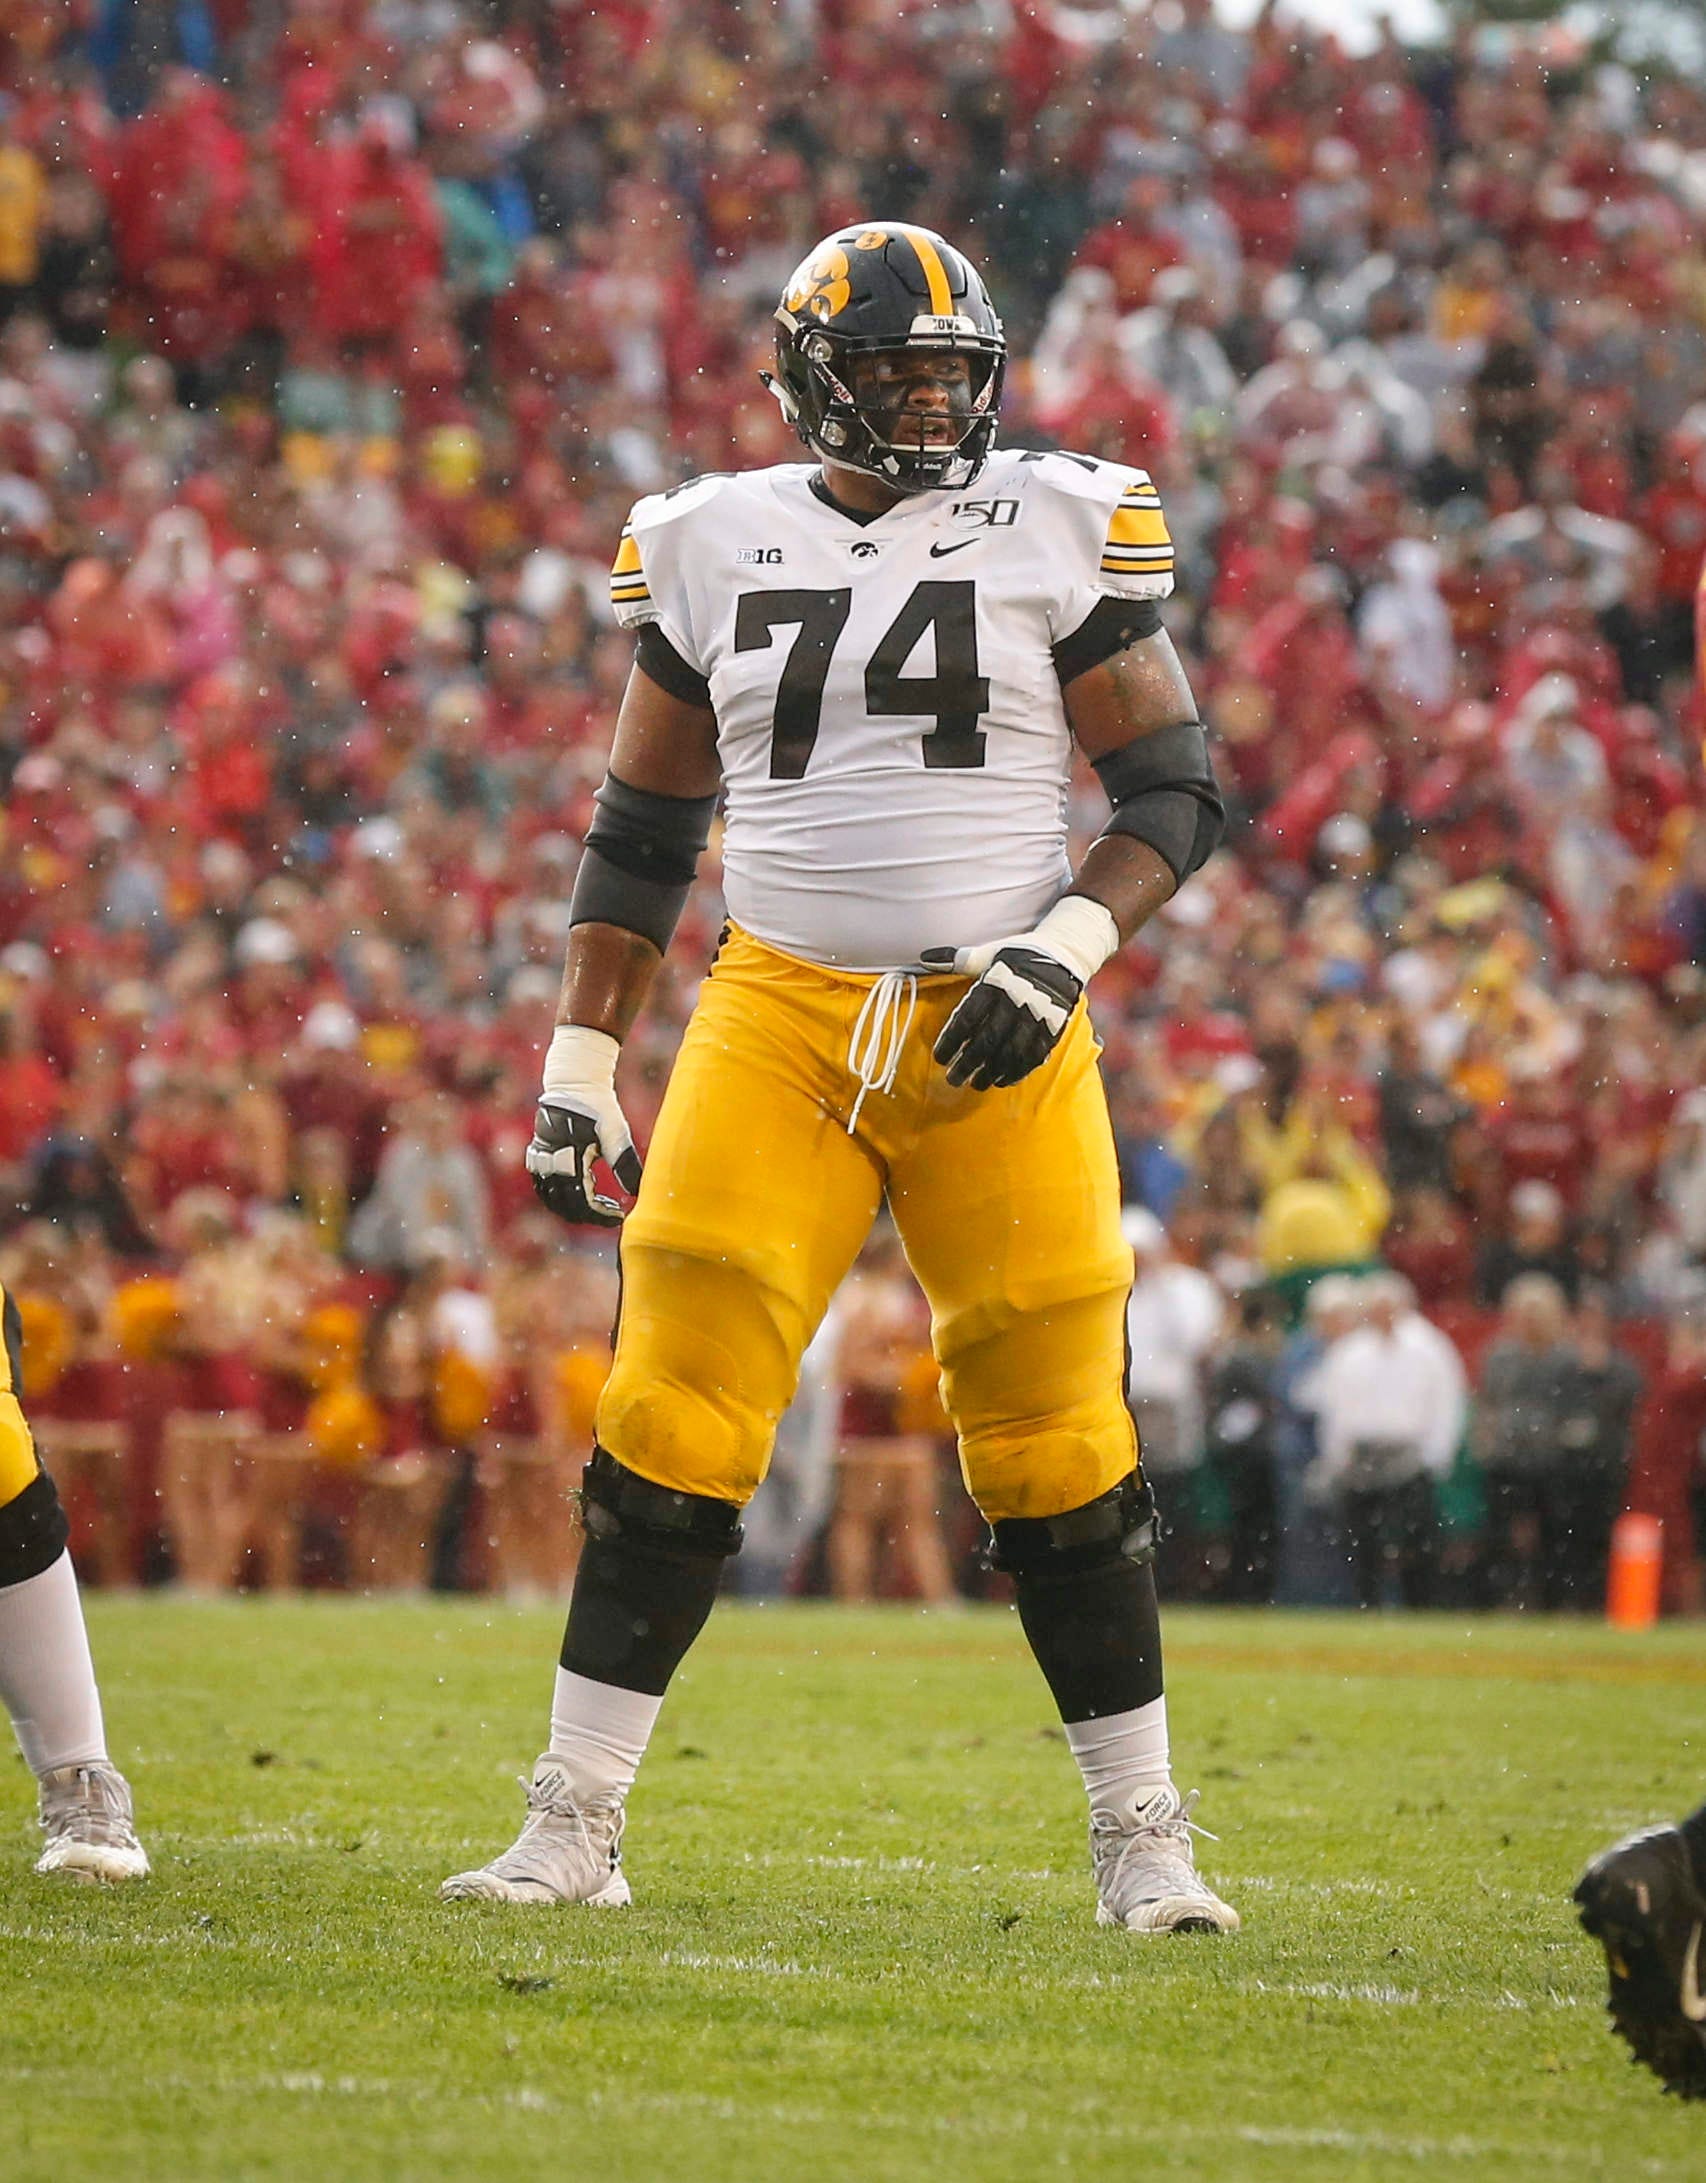 Iowa junior offensive lineman Tristan Wirfs steps to the line in the first quarter against Iowa State on Saturday, Sept. 14, 2019, at Jack Trice Stadium in Ames.